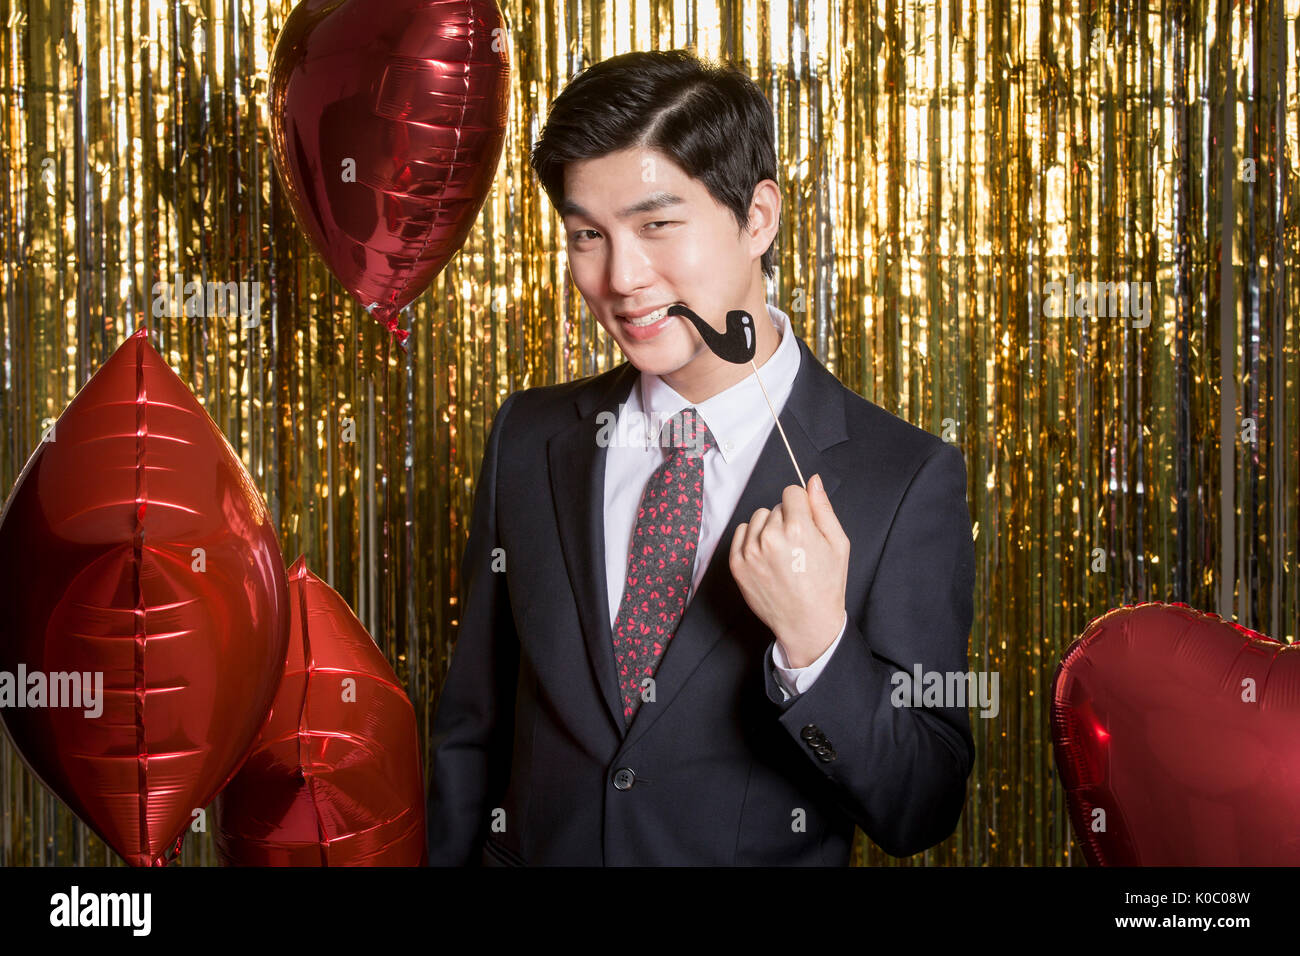 Portrait of young man in suit posing ciga-chomping Stock Photo